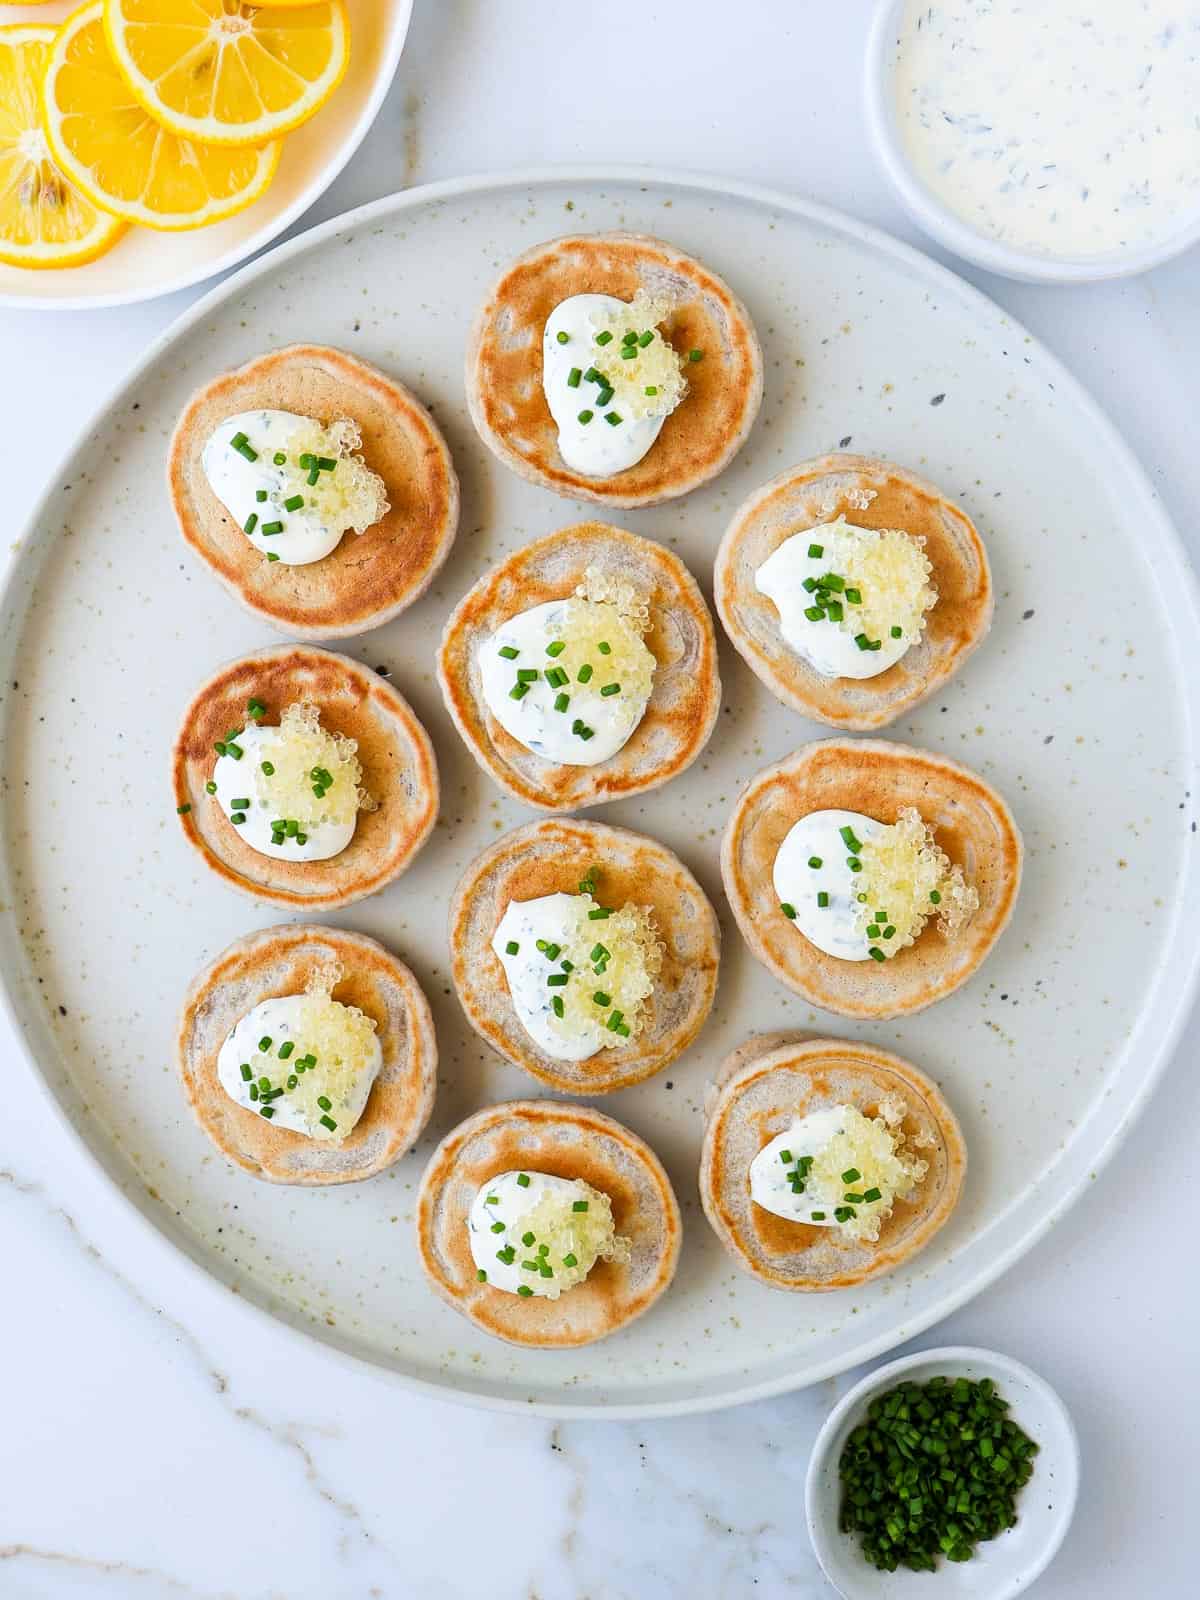 Blinis topped with the herb cream, caviar and chives. Lemon slices, chives and cream on the side.